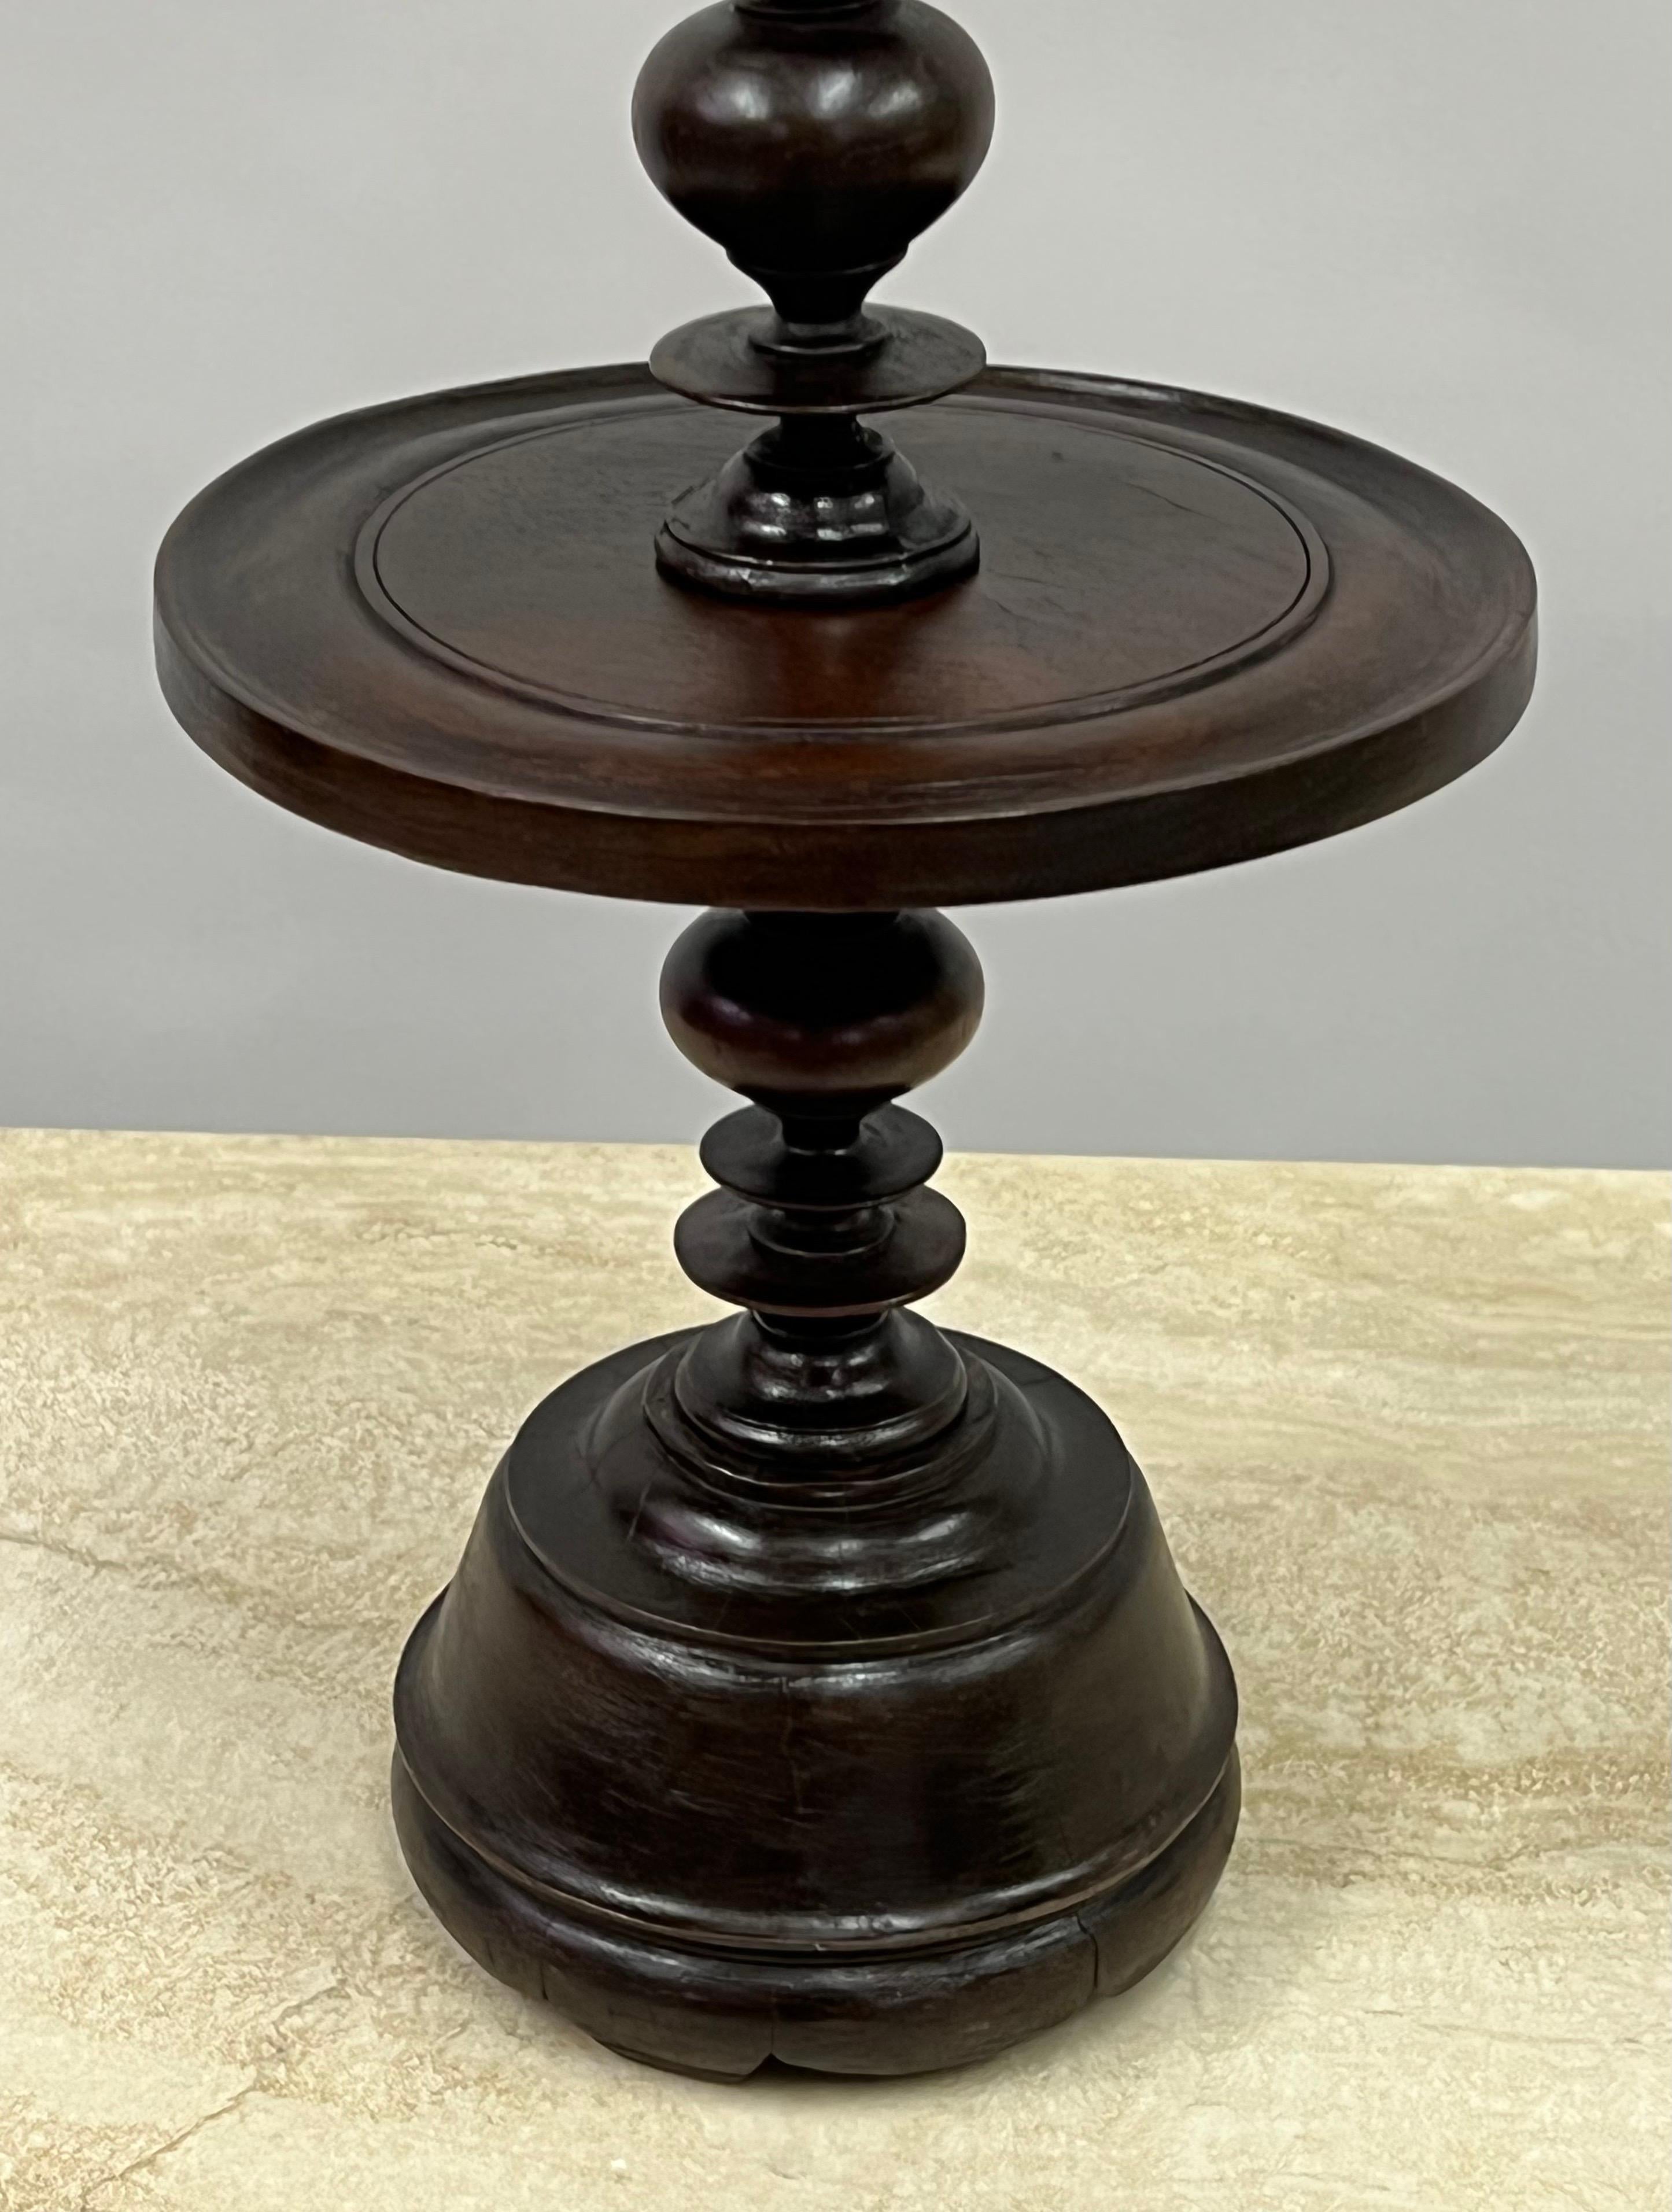 Pair of French Colonial Carved Teak Wood Table Lamp Bases or Candelabras c. 1930 For Sale 2